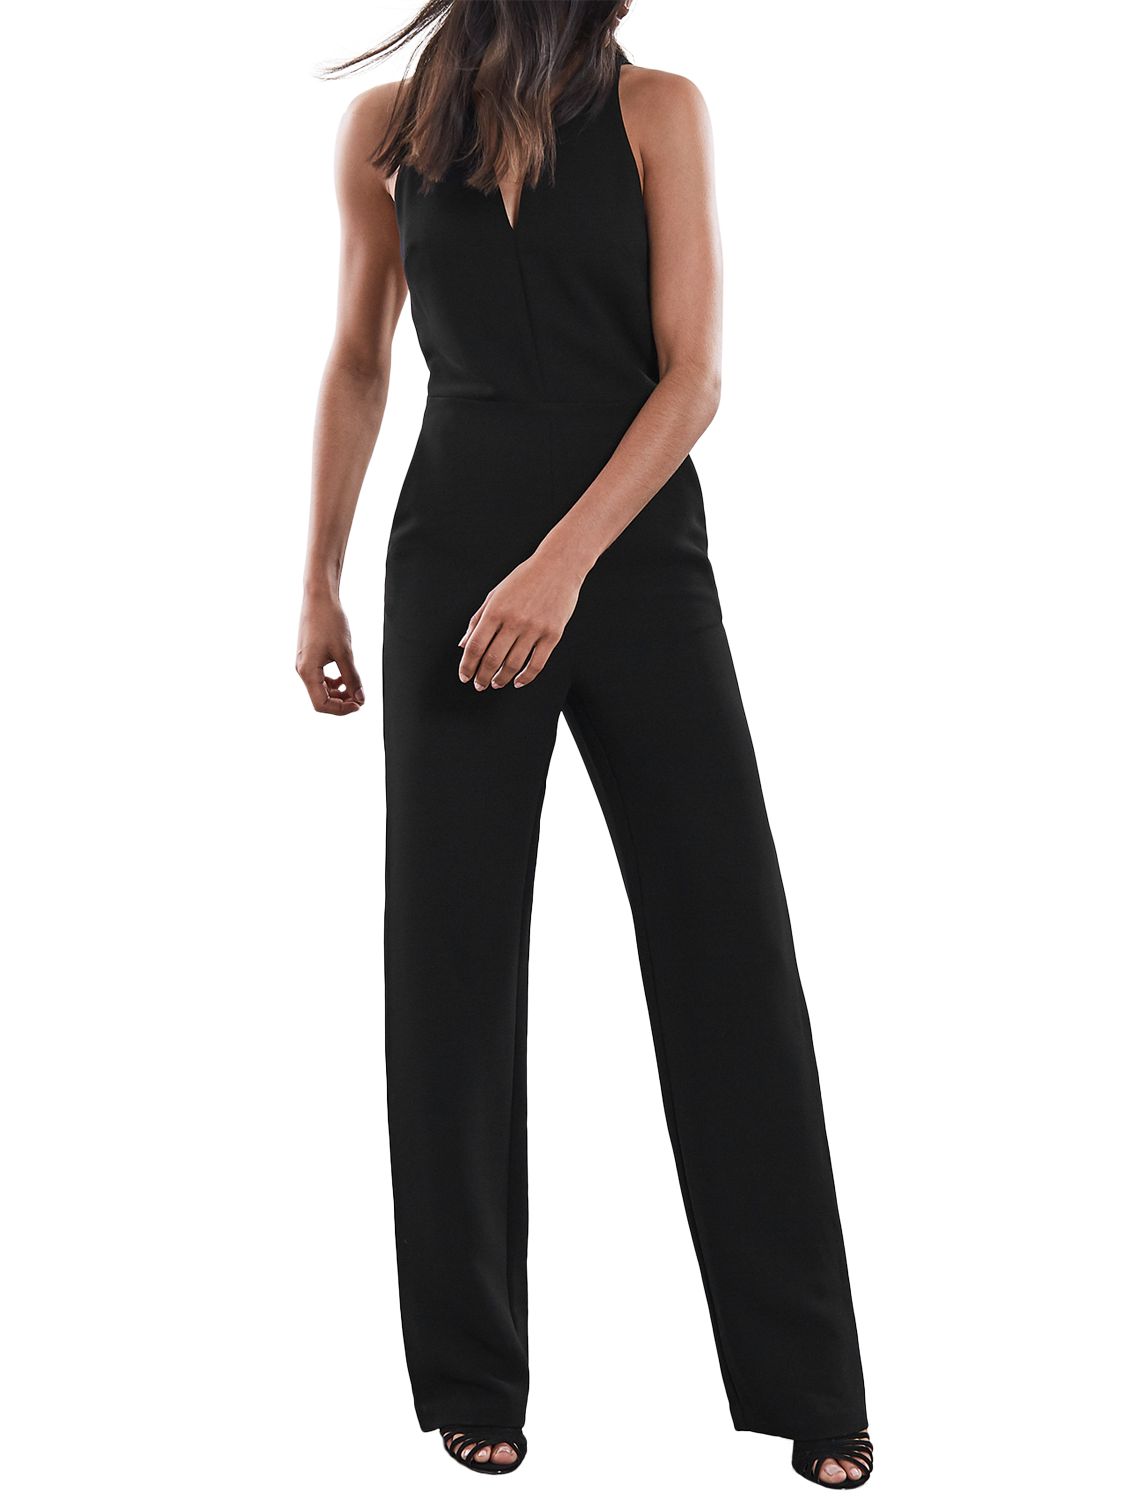 Reiss Naddia Strappy Plunge Jumpsuit, Black